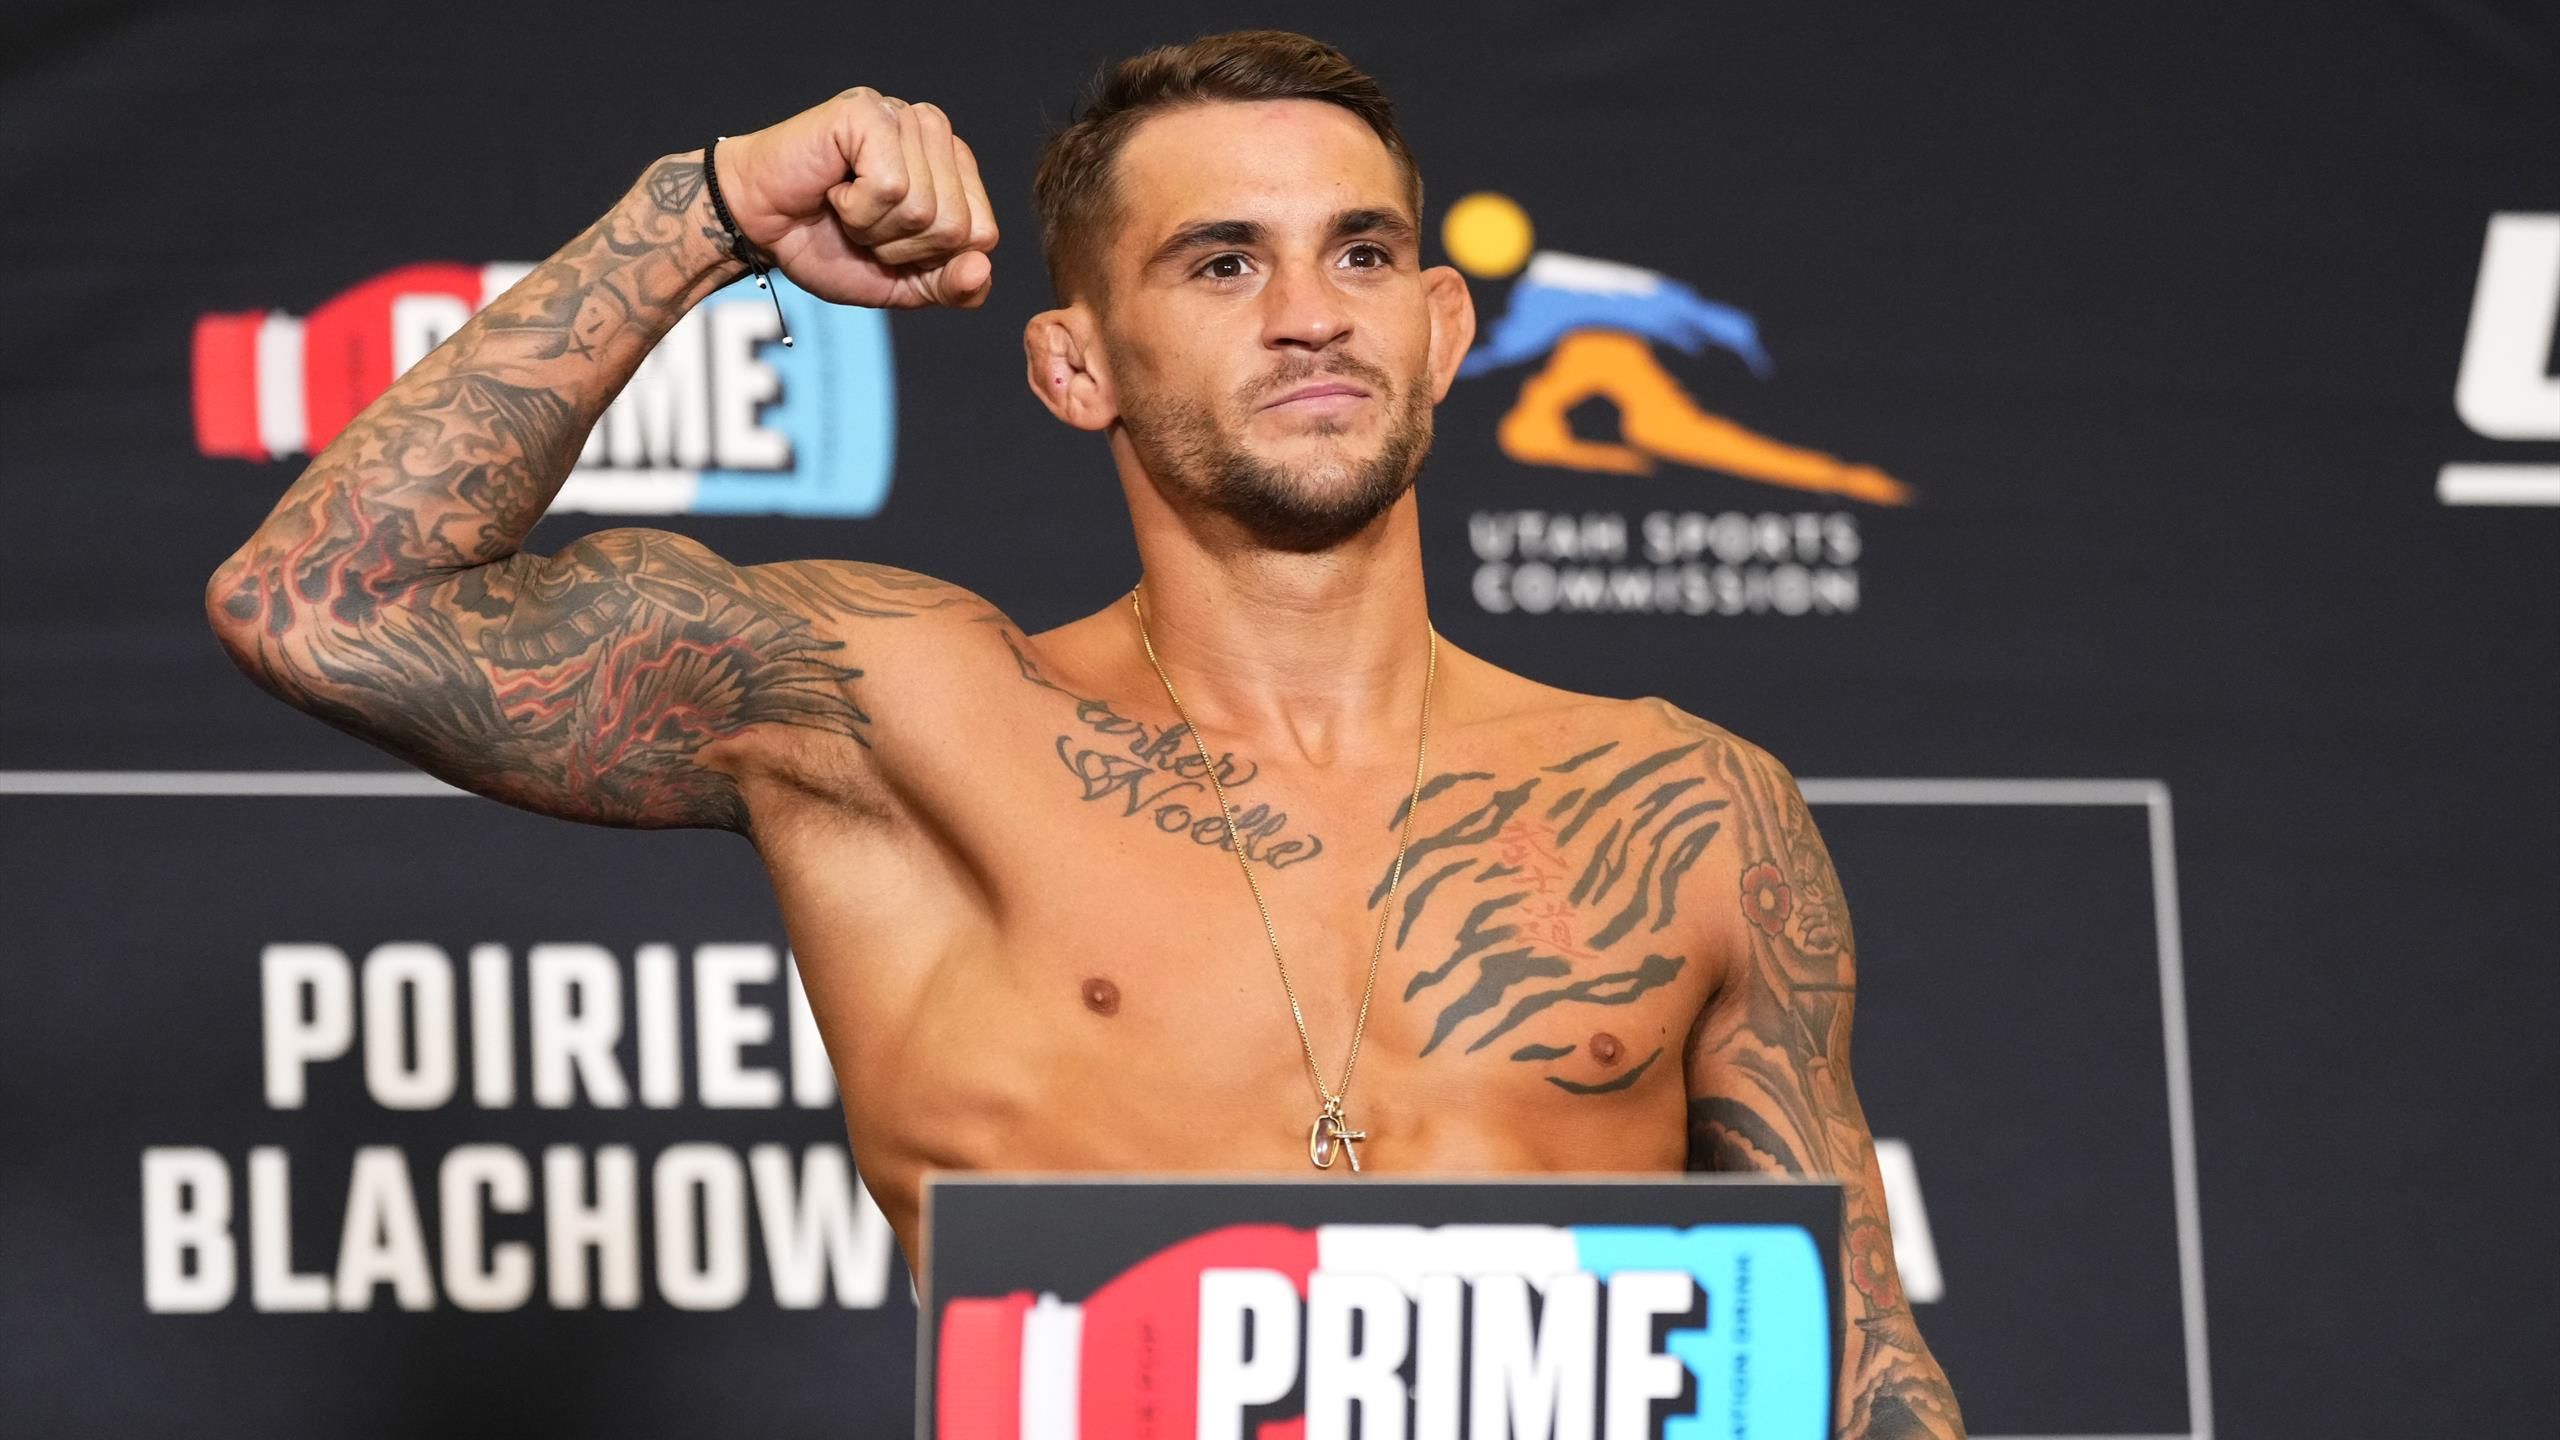 Dustin Poirier and Justin Gaethje make weight ahead of lightweight